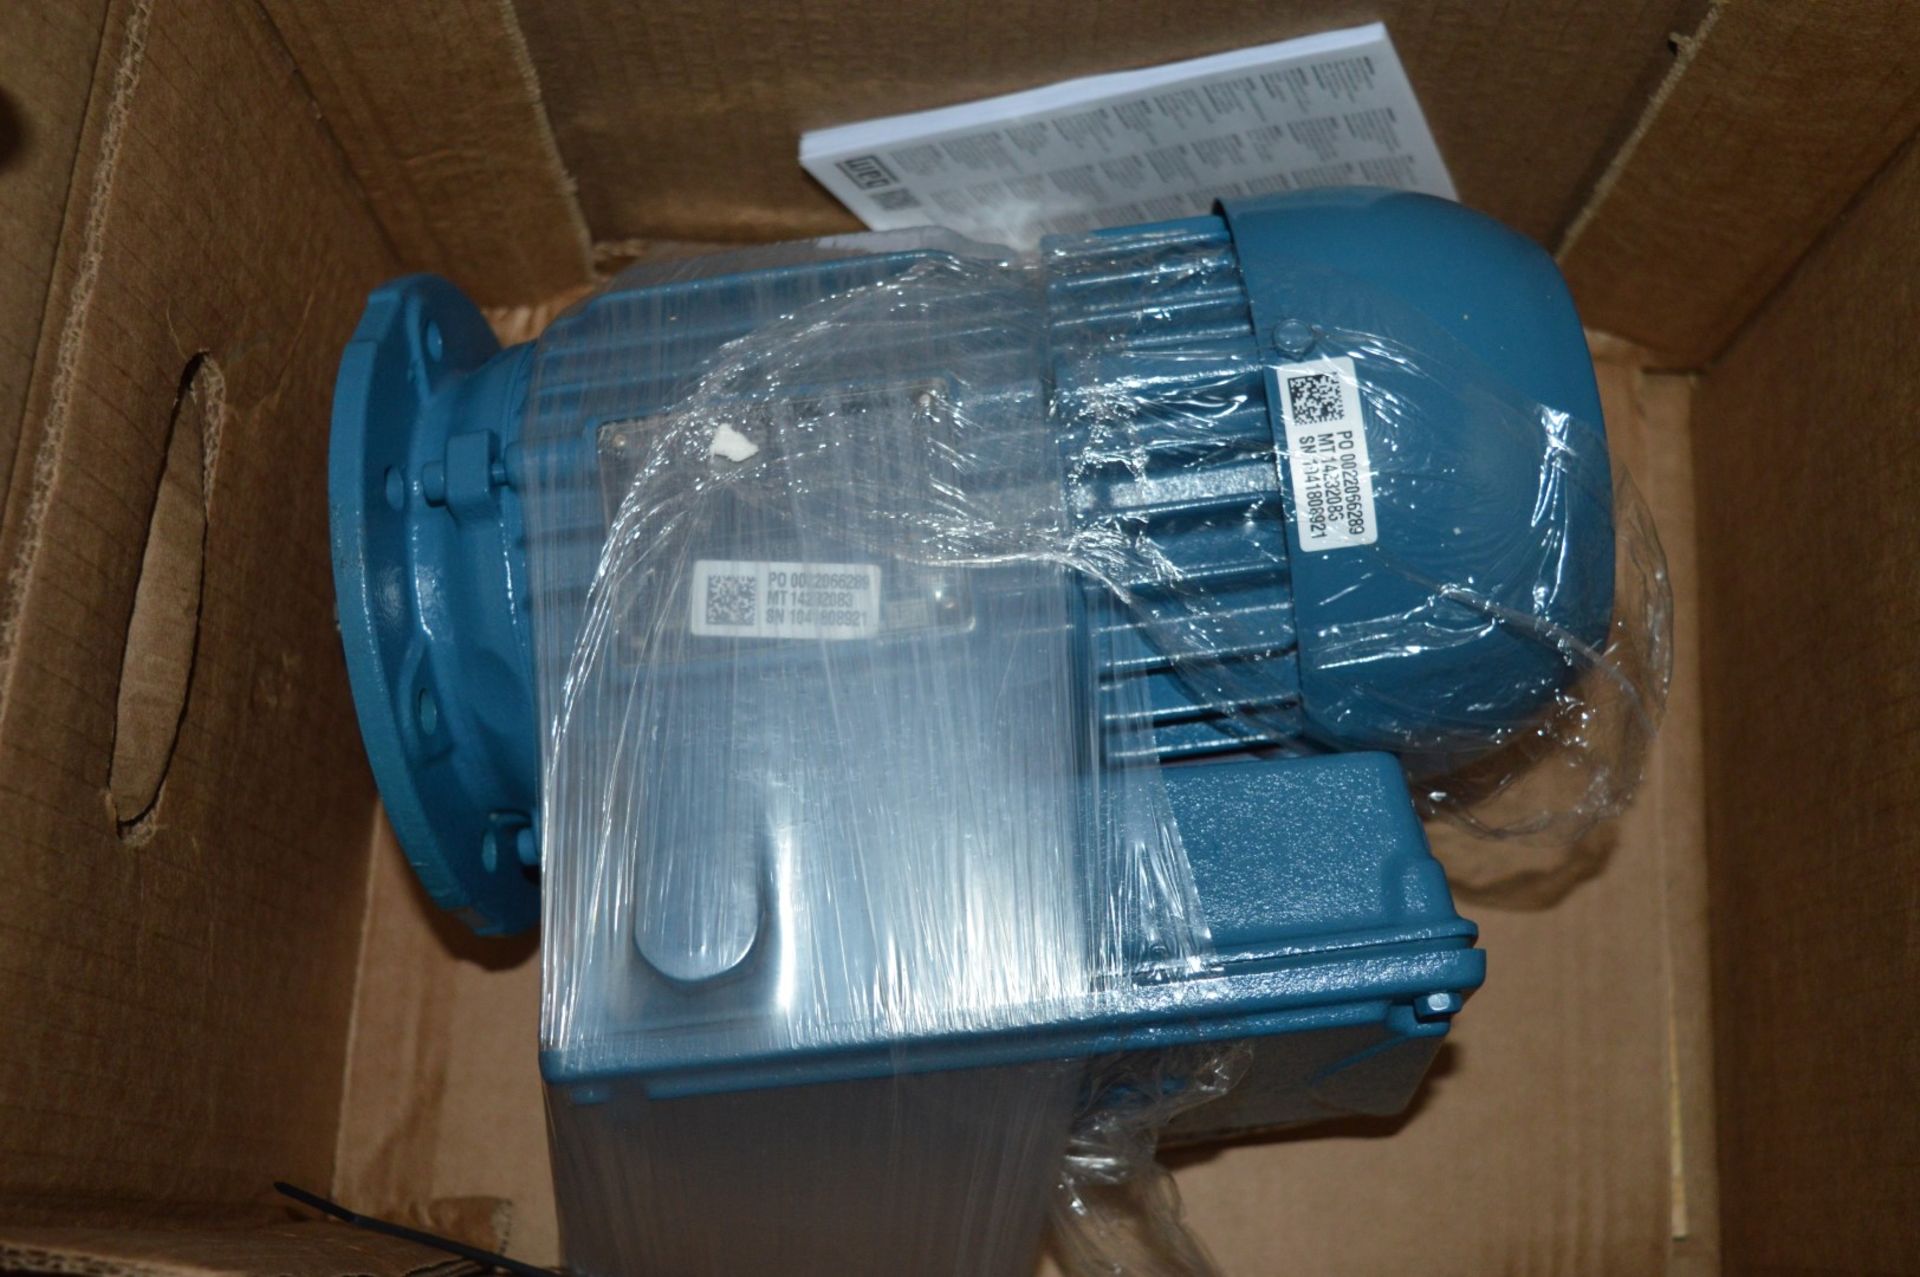 1 x Weg W22 240v IP55 Single Phase Electric Motor - New and Boxed - CL295 - Location: Altrincham - Image 7 of 8